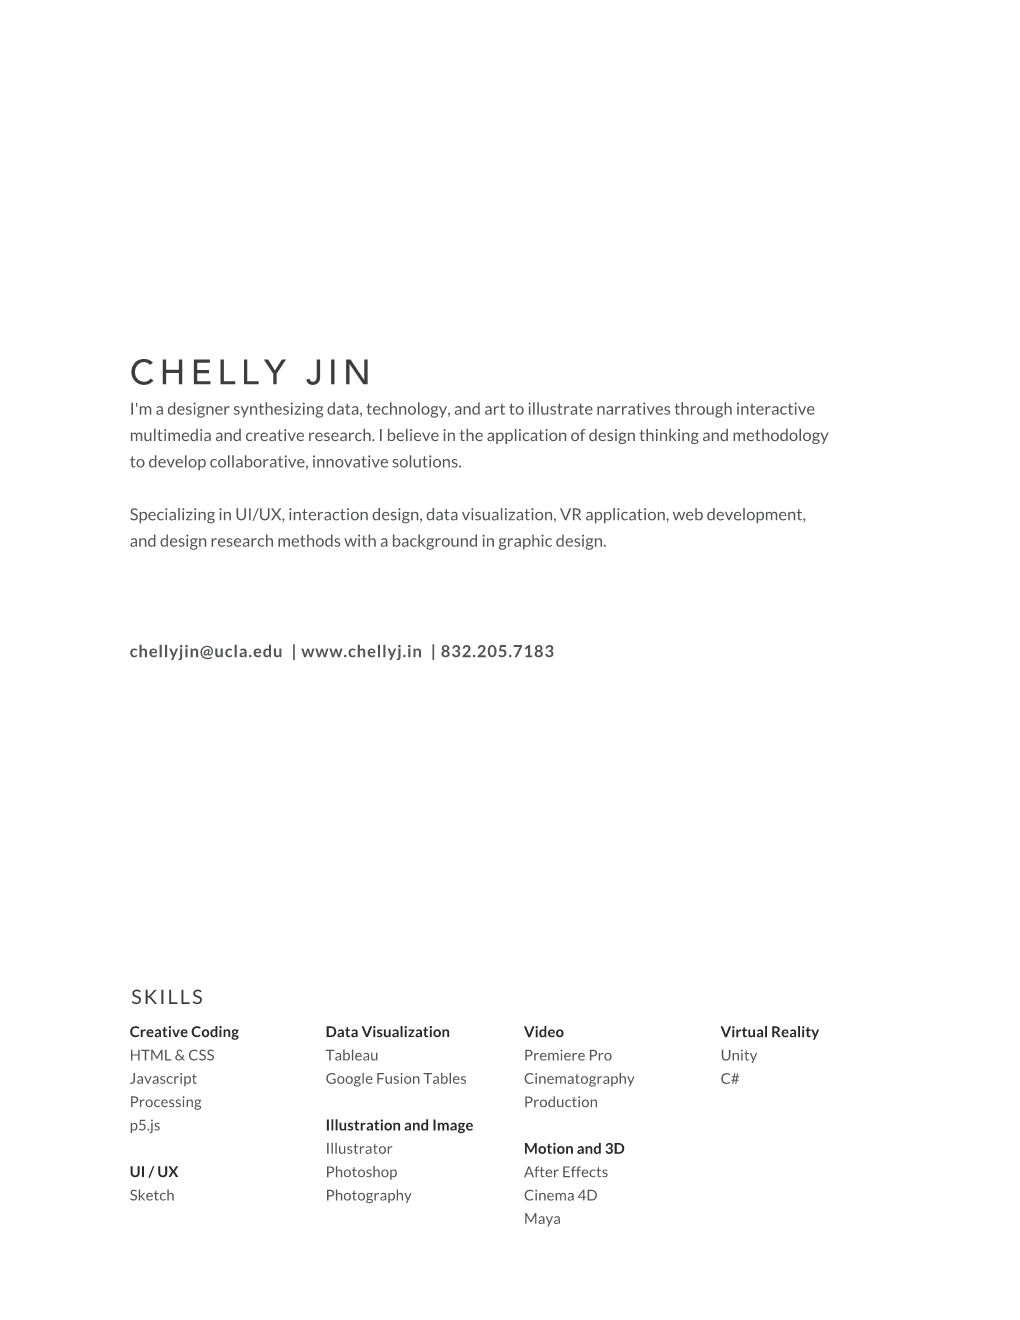 CHELLY JIN I'm a Designer Synthesizing Data, Technology, and Art to Illustrate Narratives Through Interactive Multimedia and Creative Research